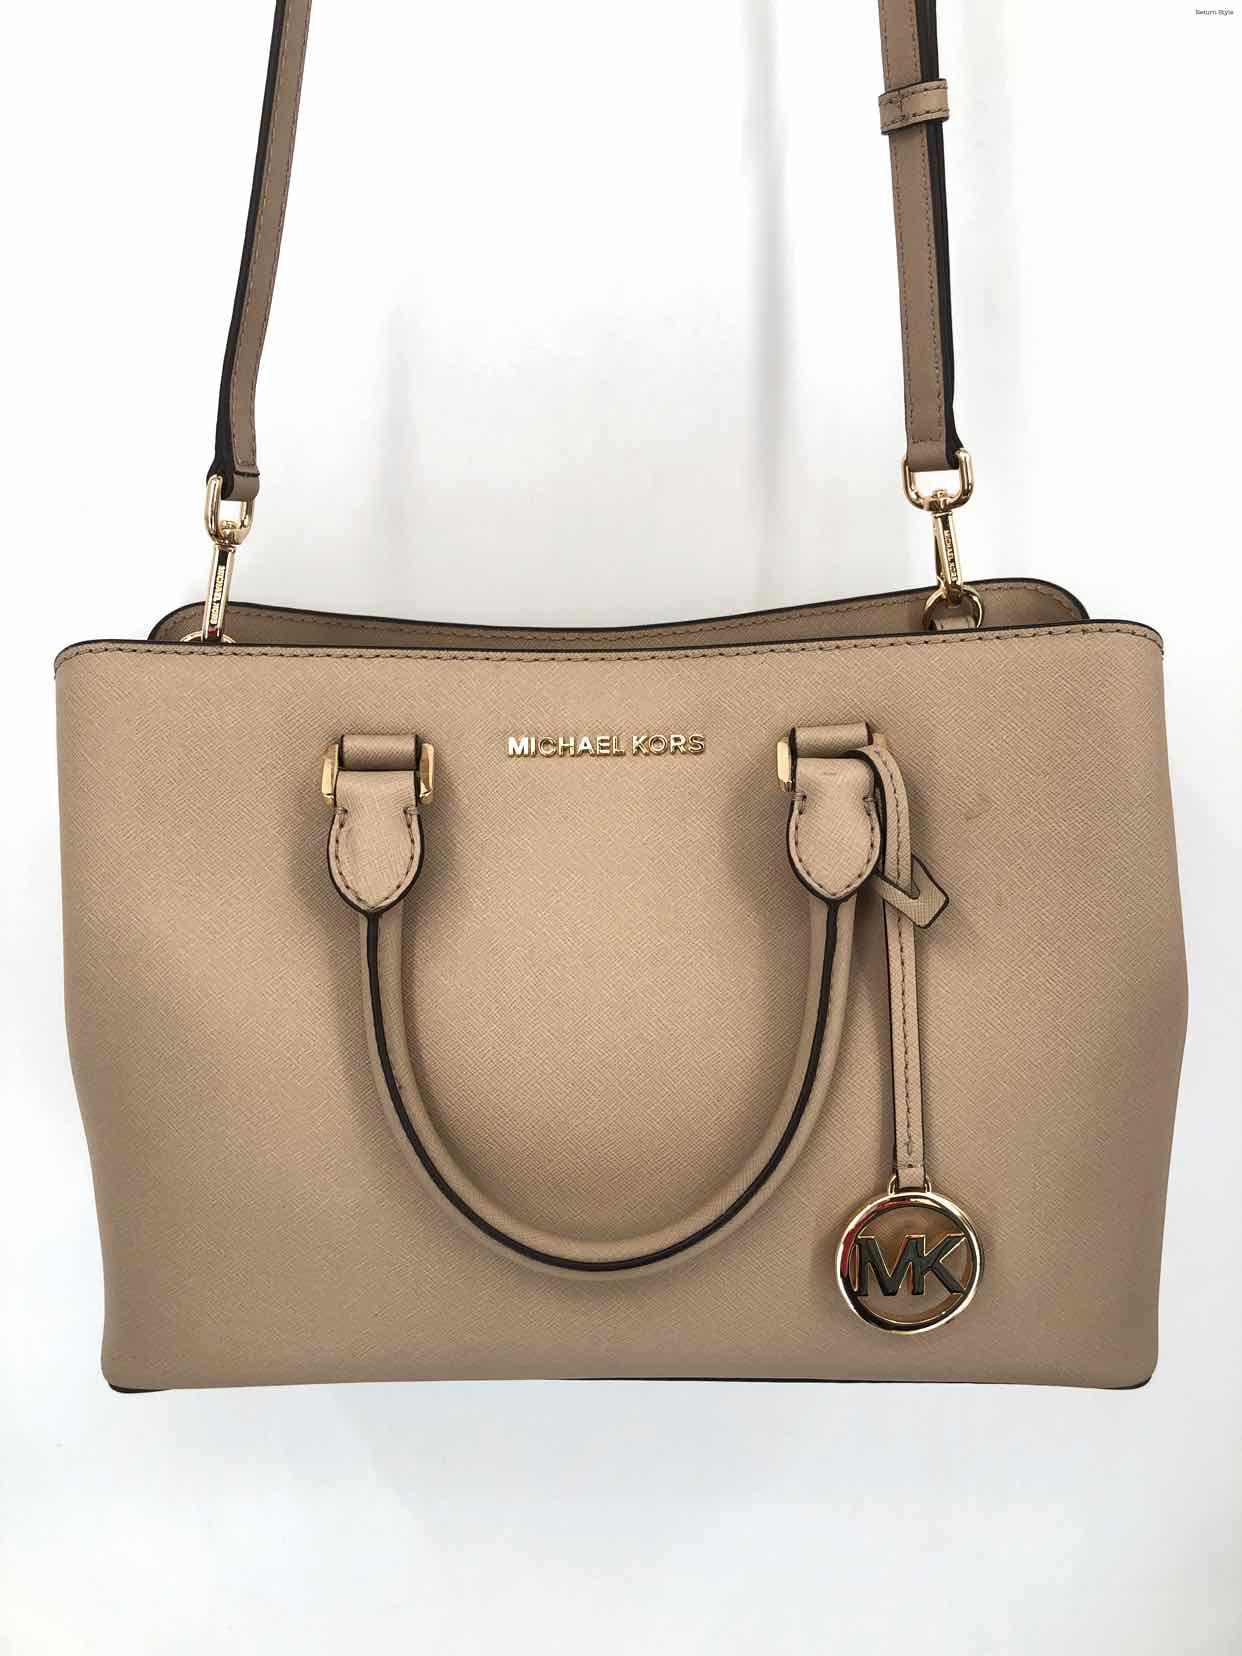 How To Spot a Fake Michael Kors Bag: Guide to Real and Authentic Purses |  Sarah Scoop